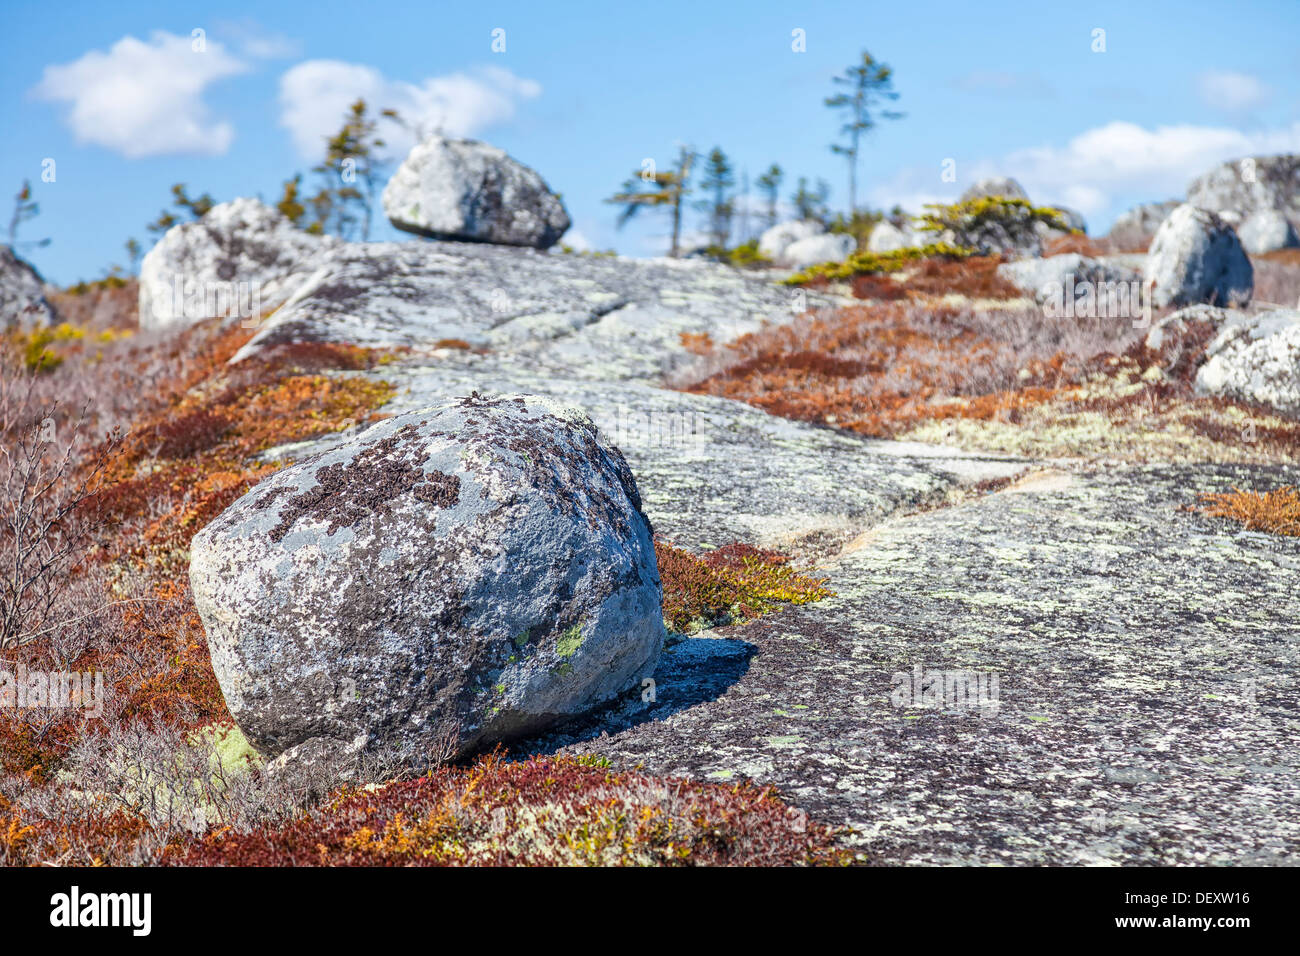 A rocky northern landscape with a fragile and threatened ecosystem. Stock Photo